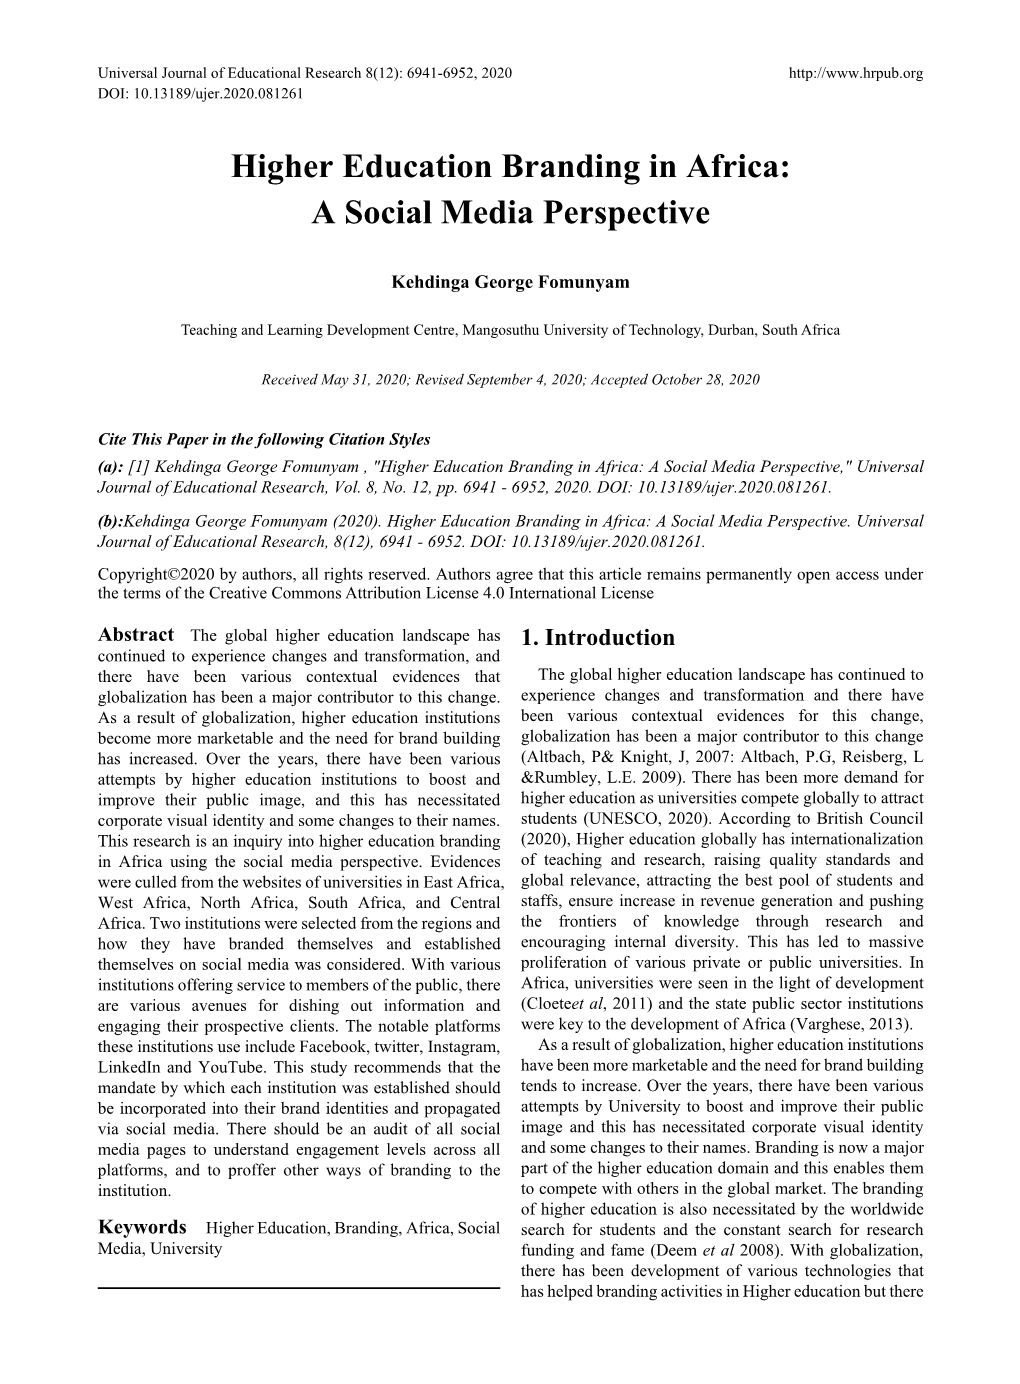 Higher Education Branding in Africa: a Social Media Perspective